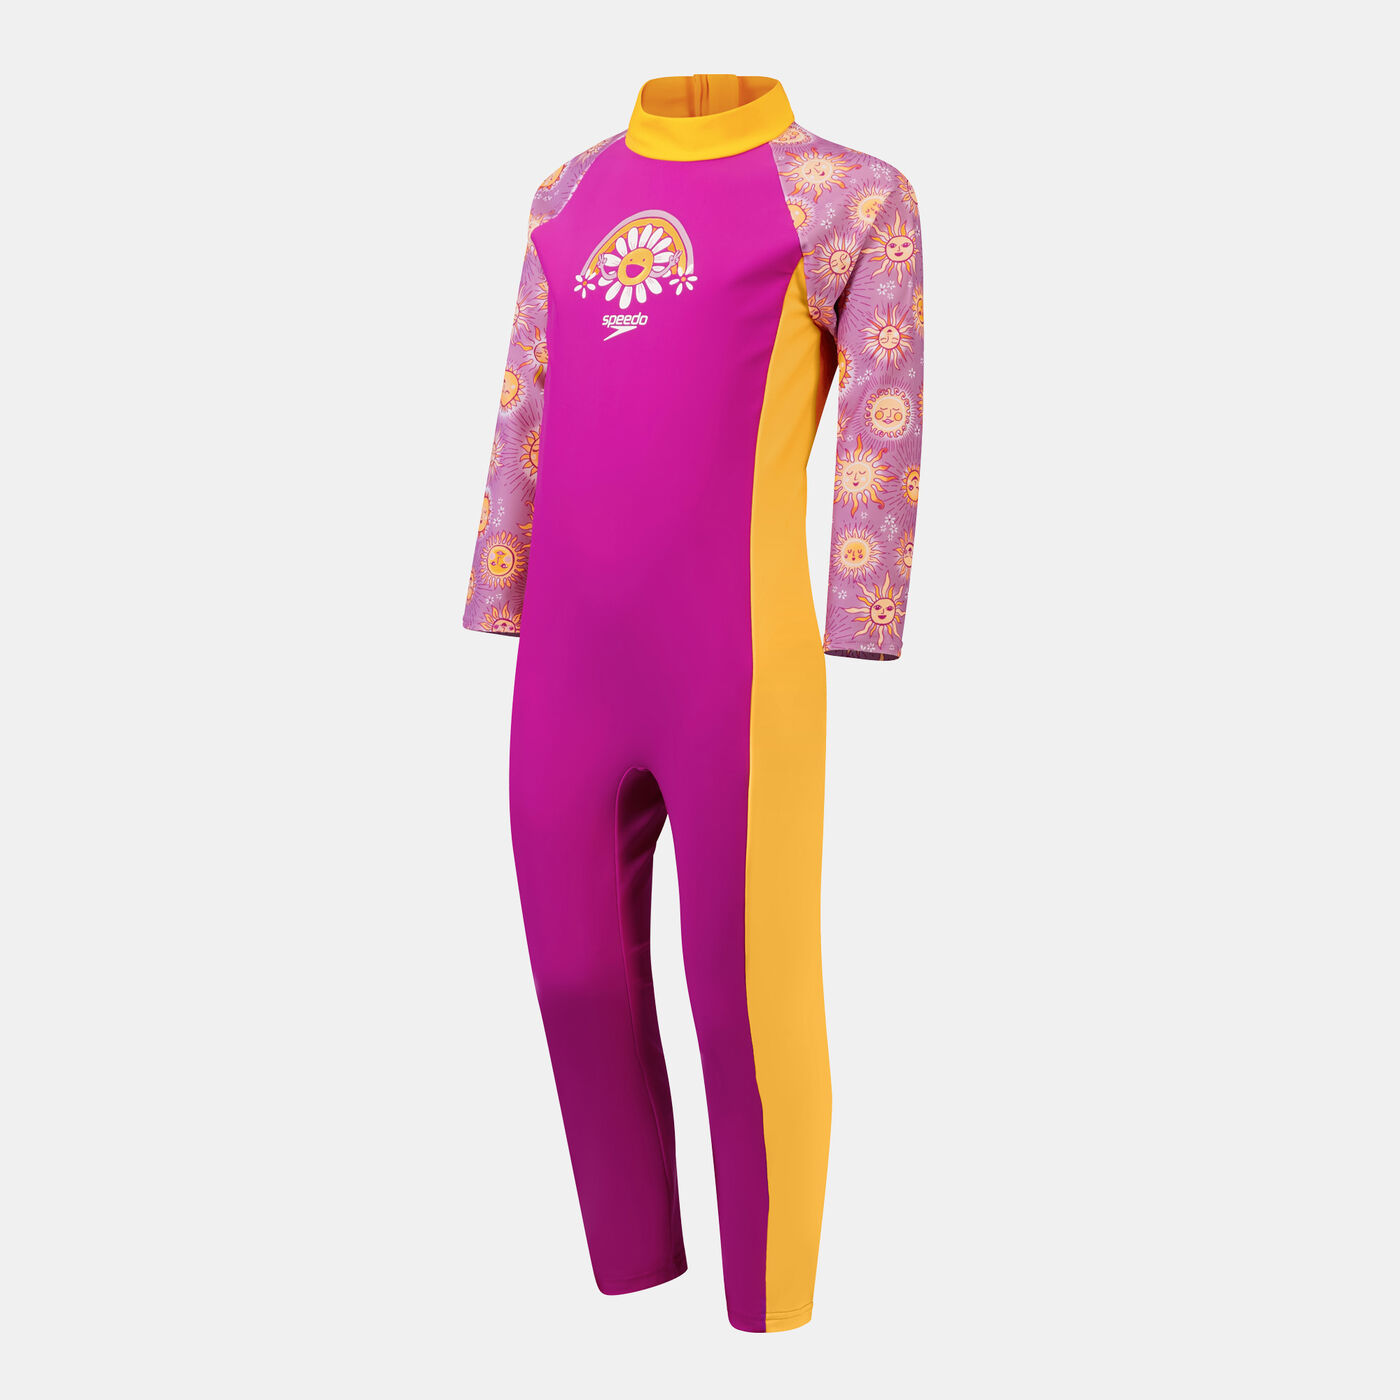 Kids' Printed All-In-One Sun Swimsuit